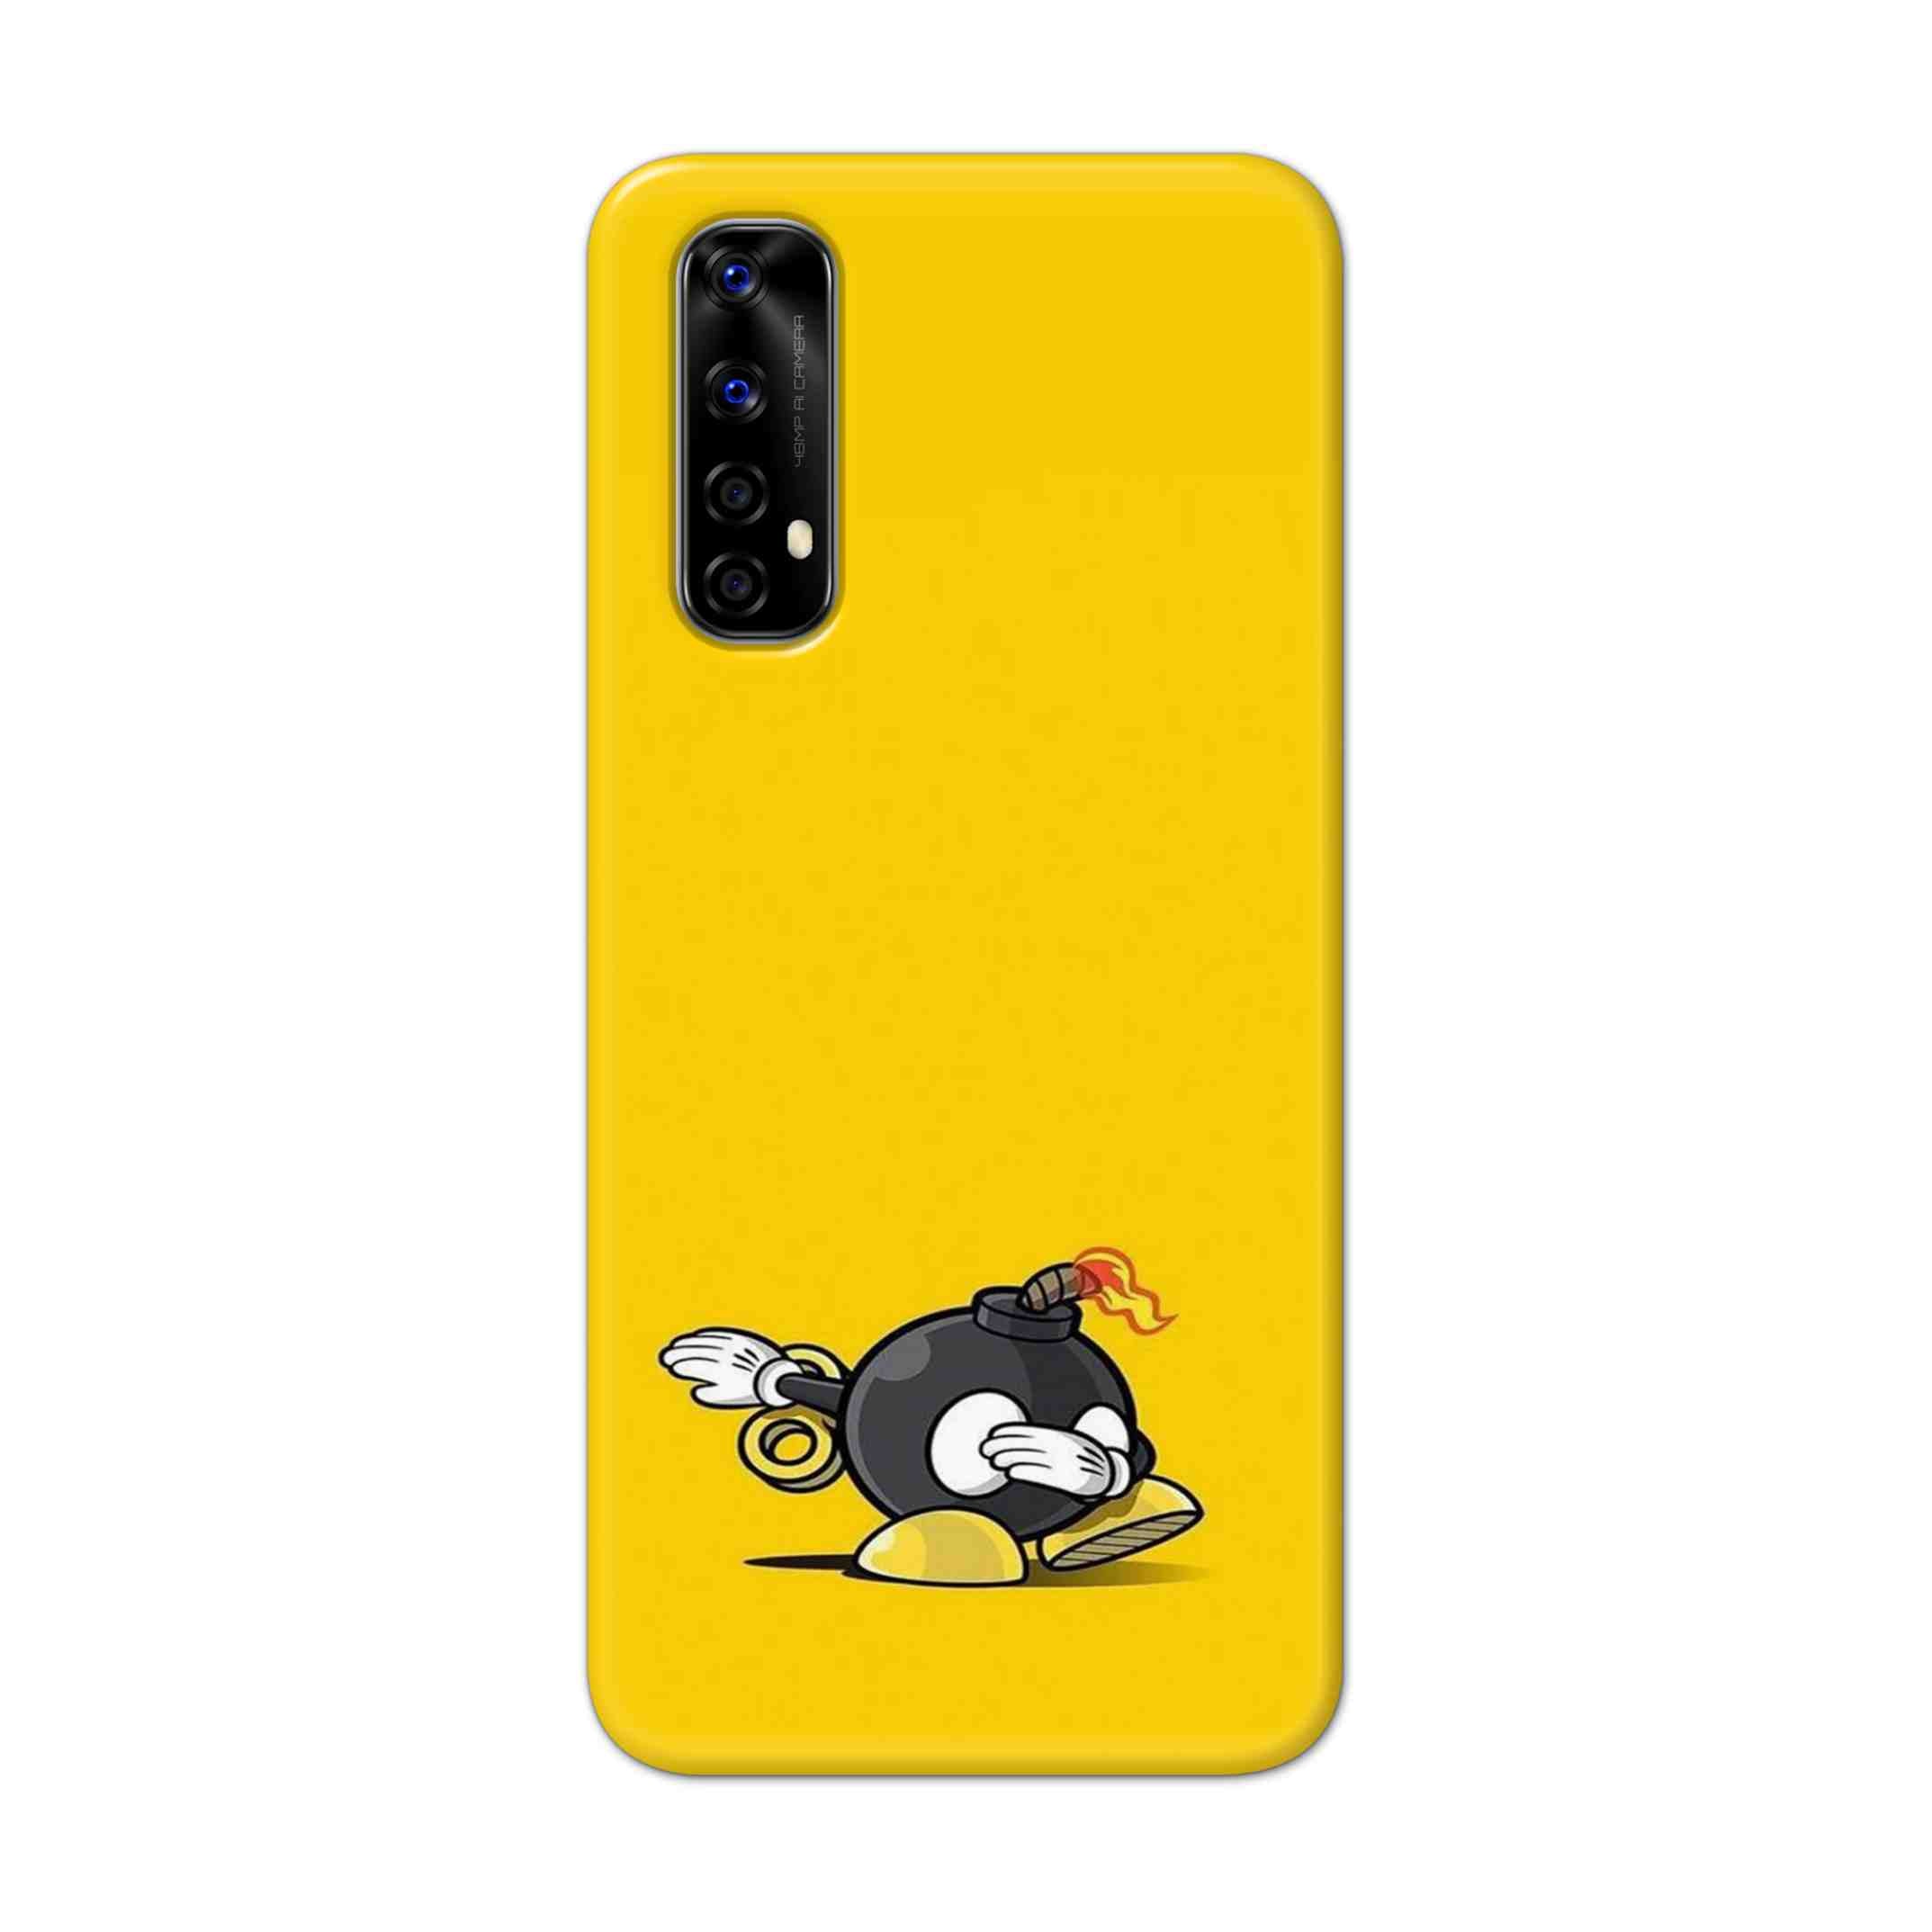 Buy Dashing Bomb Hard Back Mobile Phone Case Cover For Realme Narzo 20 Pro Online